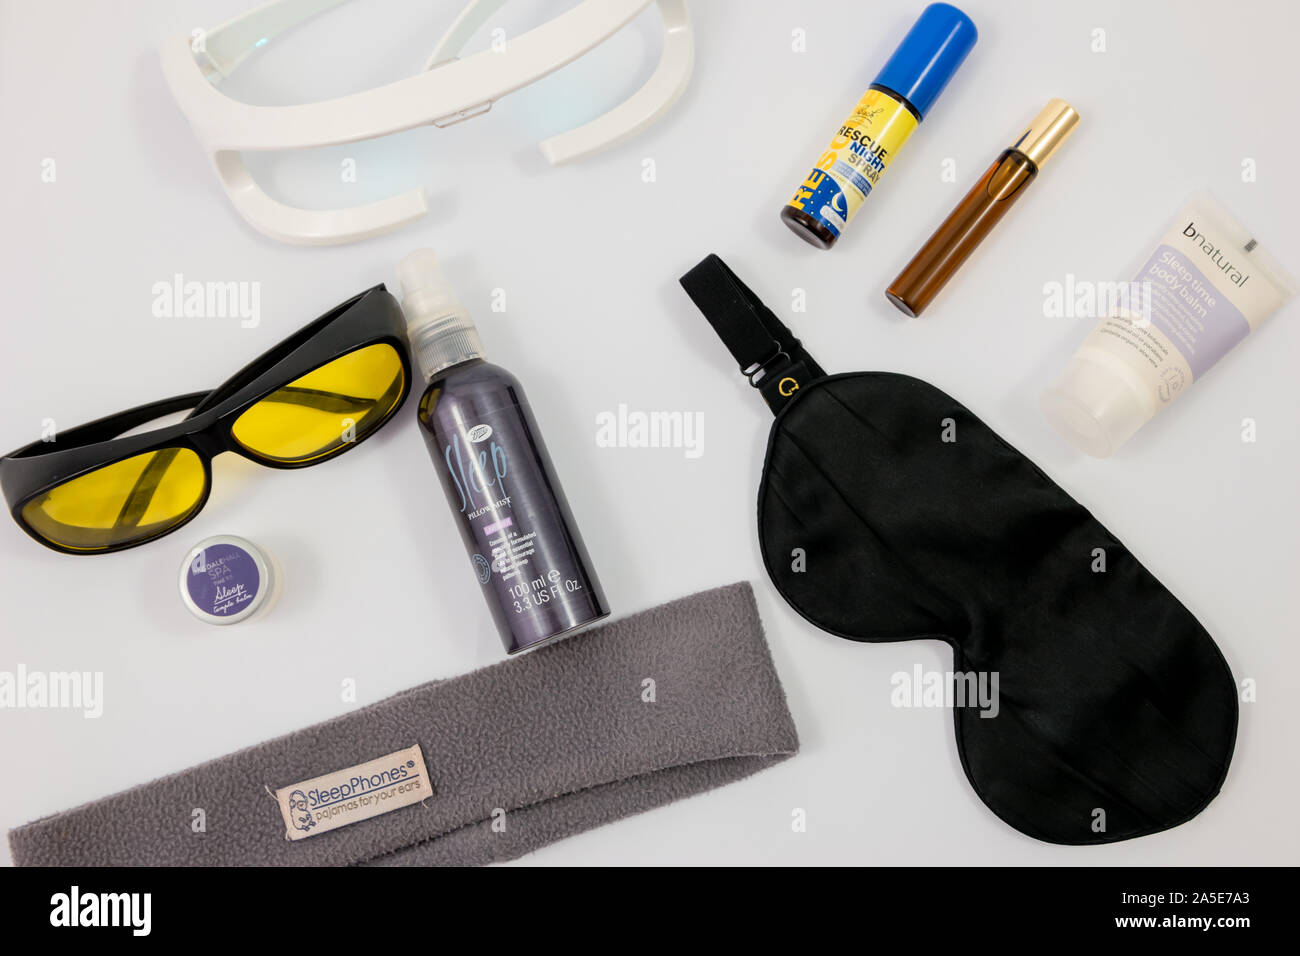 A range of complementary therapy products and gadgets for insomnia and sleep disorders. Aromatherapy, eye mask, sleepphones, yellow glasses Stock Photo